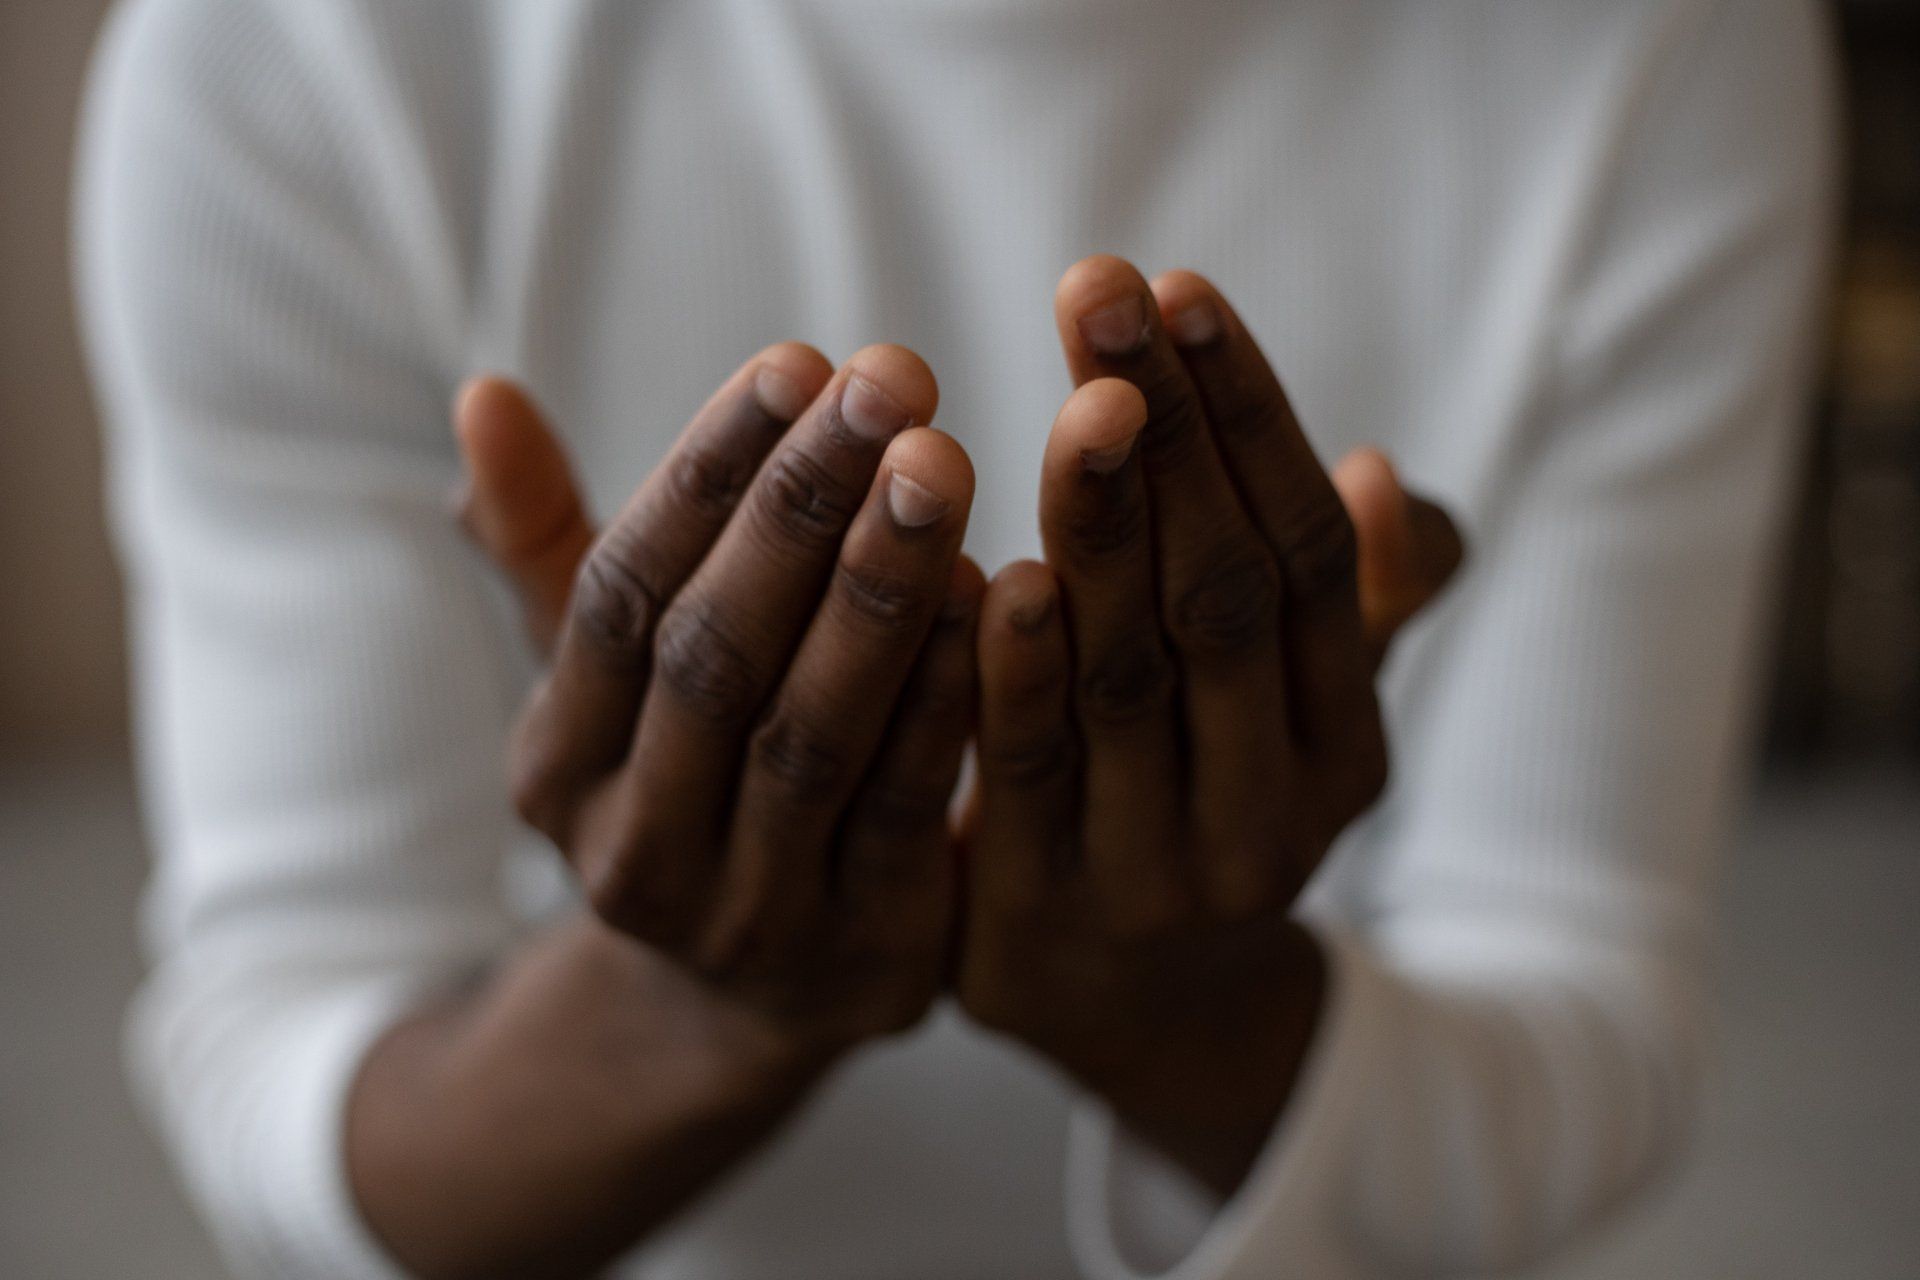 A man in a white shirt is praying with his hands together.